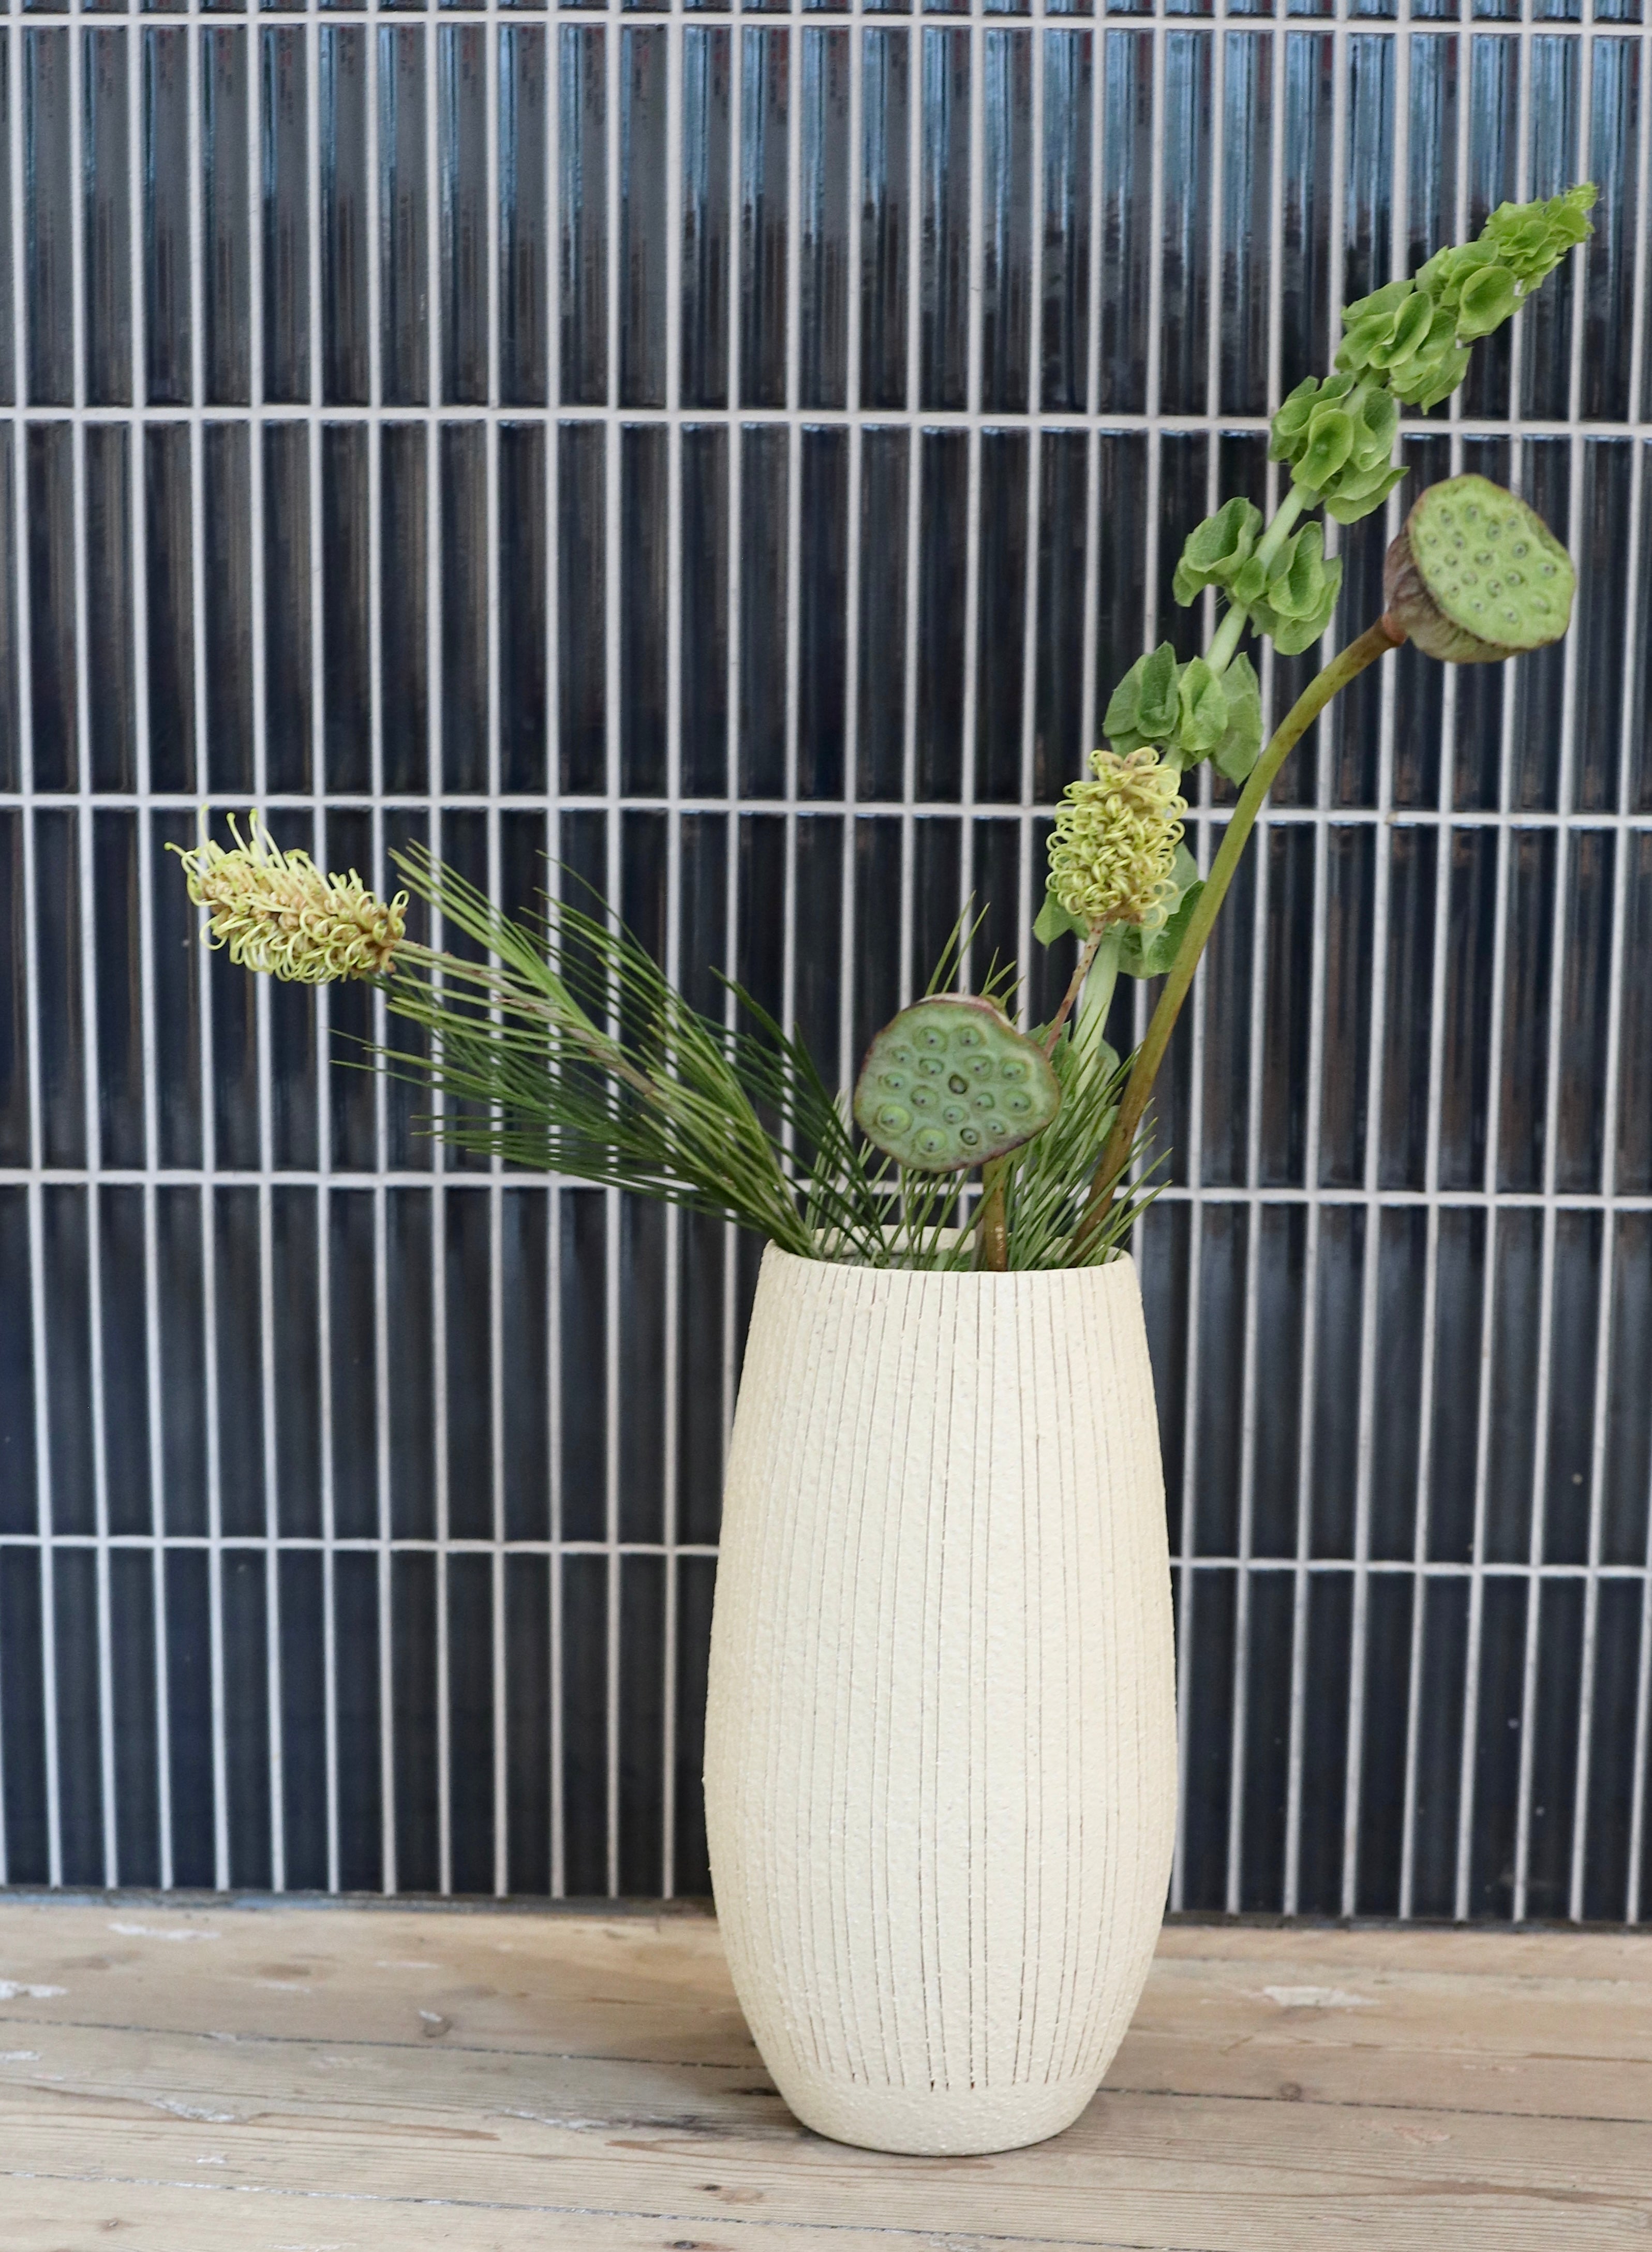 Large handmade vase in beige with stripes